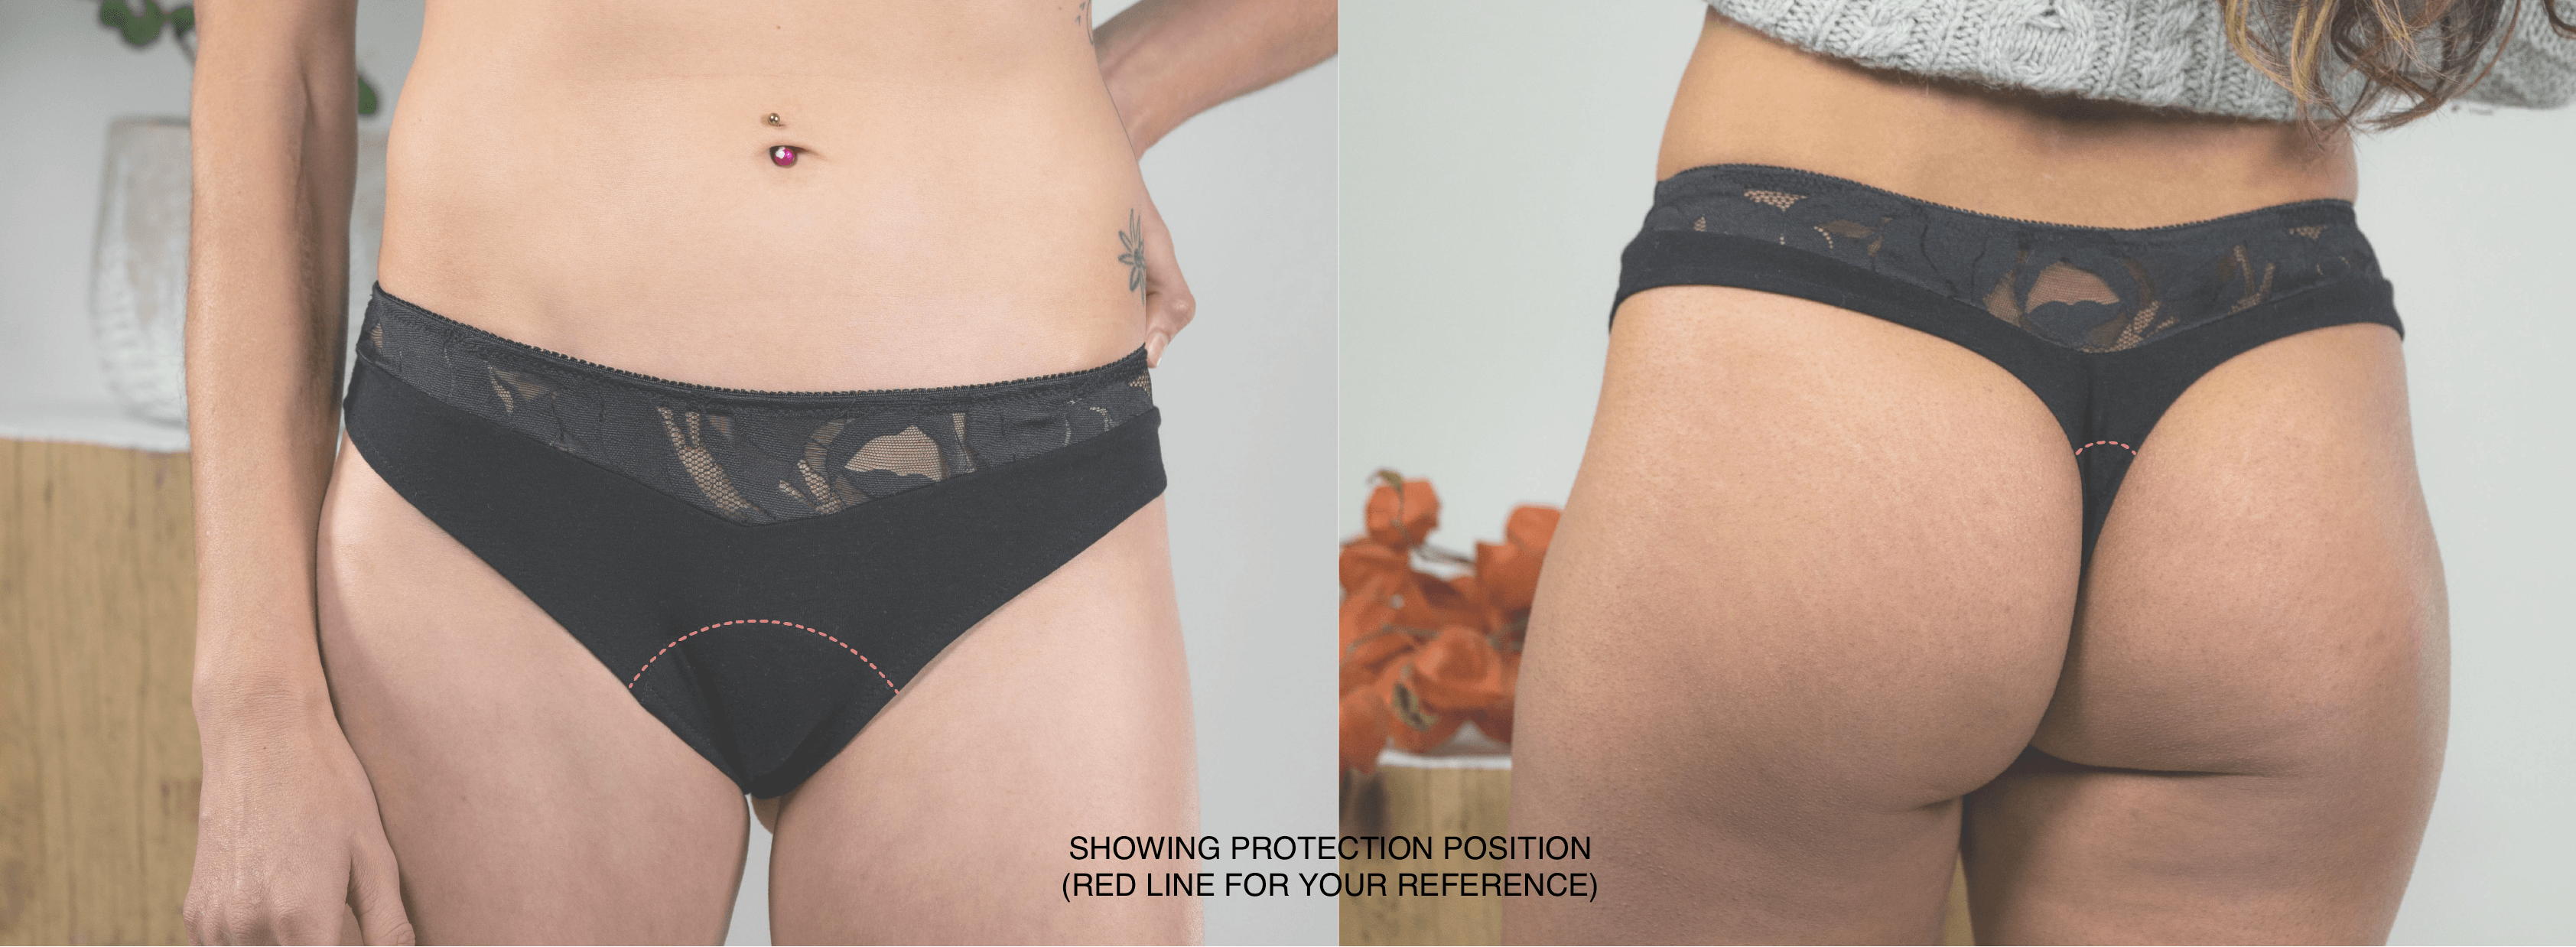 GISELLE thong period underwear - Rosaseven